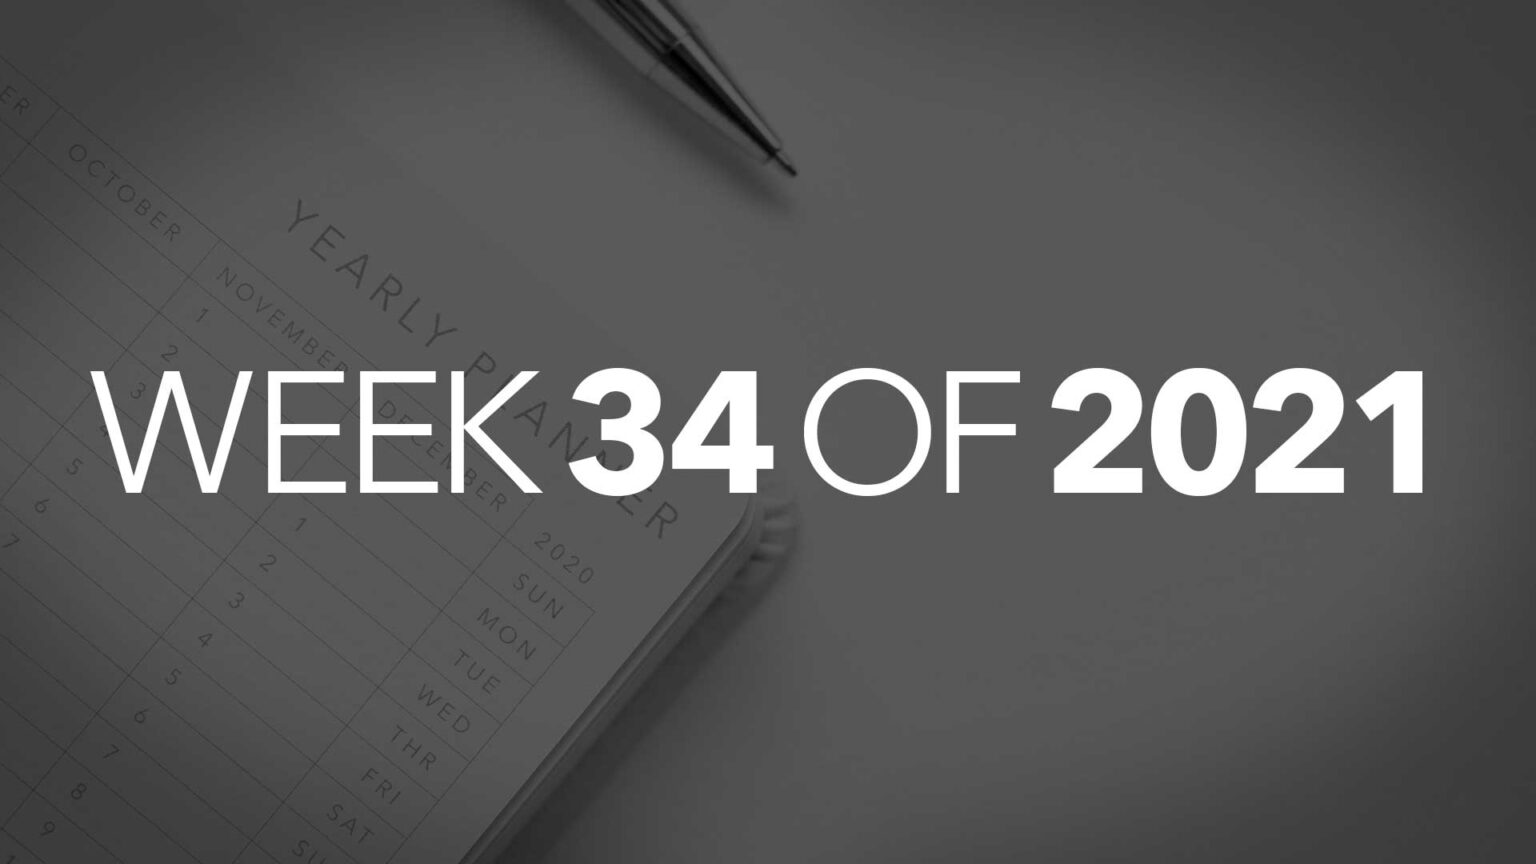 List of National Days for Week 34 of 2021 List Of National Days